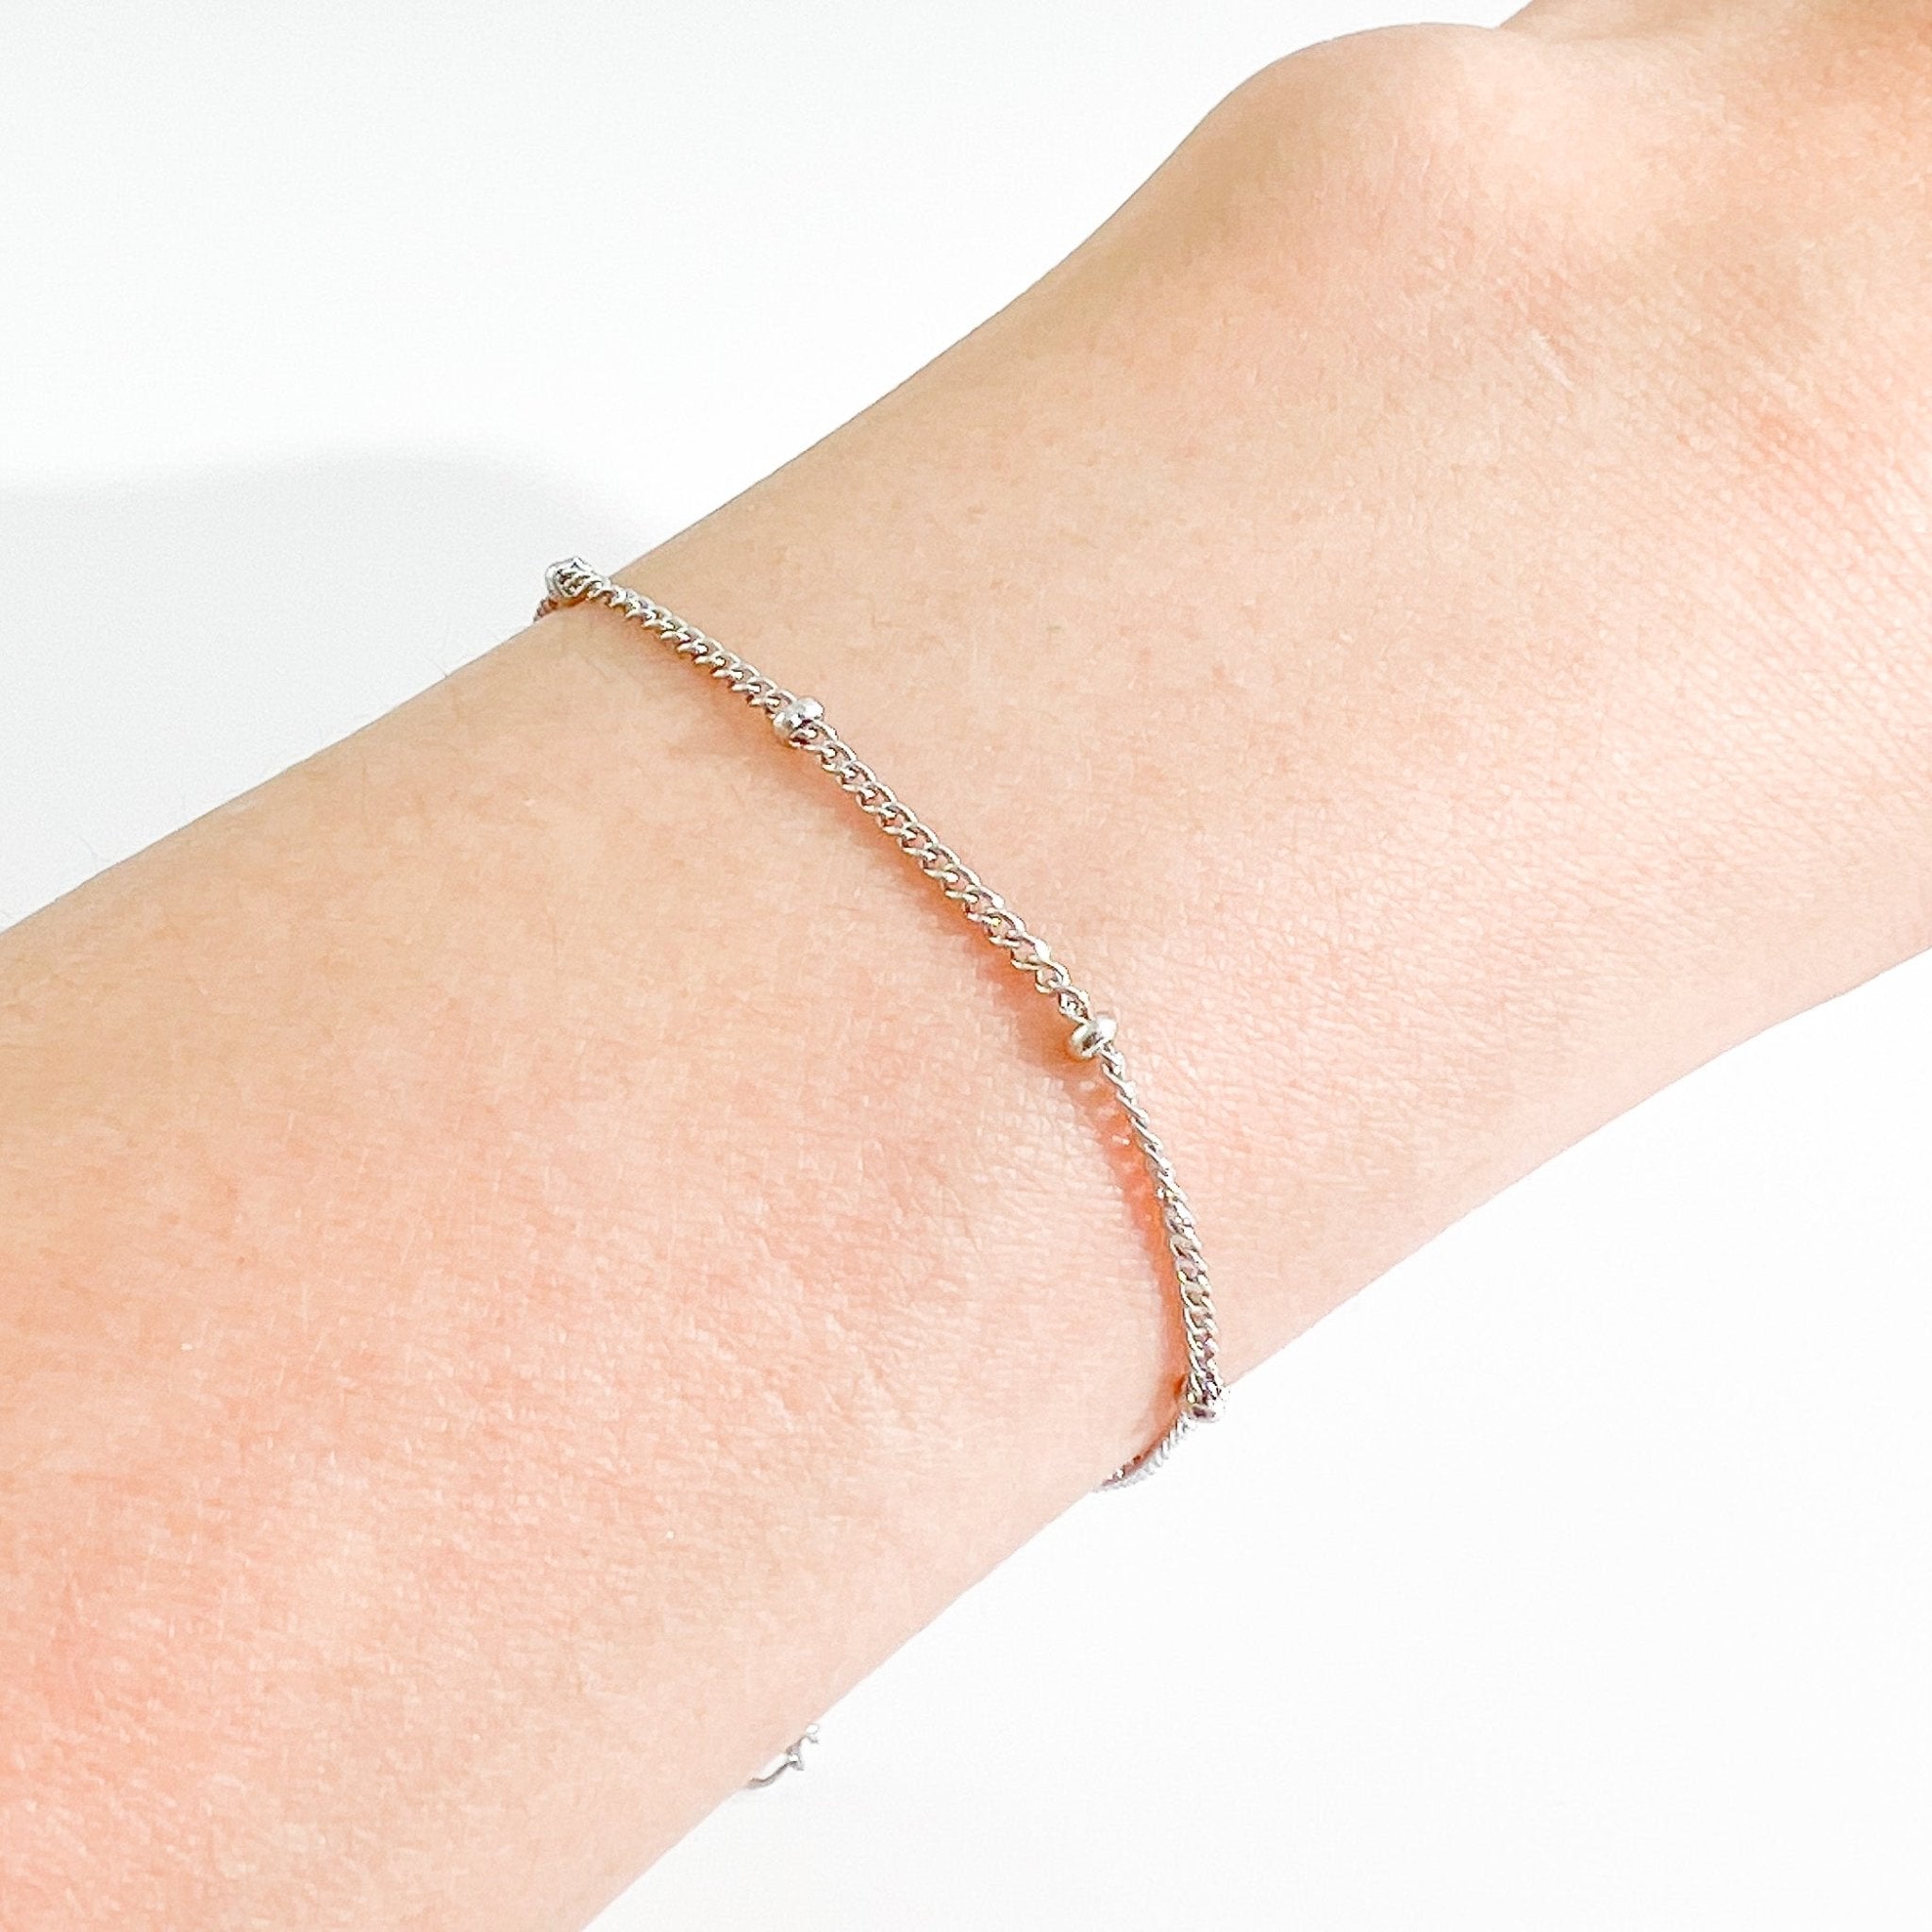 Octavia Bracelet in Silver - Flaire & Co.